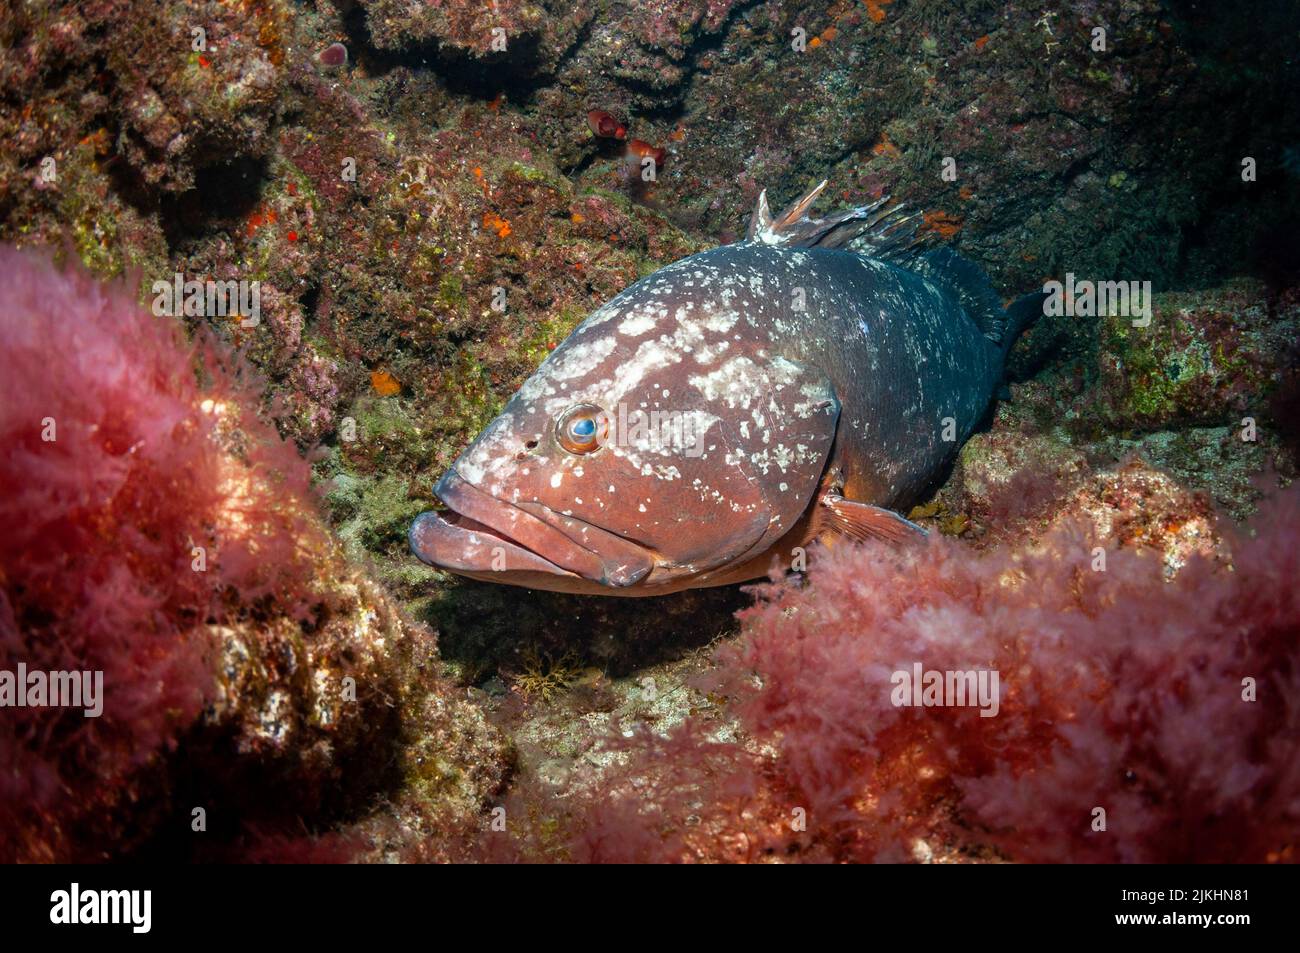 A closeup shot of an Epinephelus fish species among colorful corals underwater Stock Photo